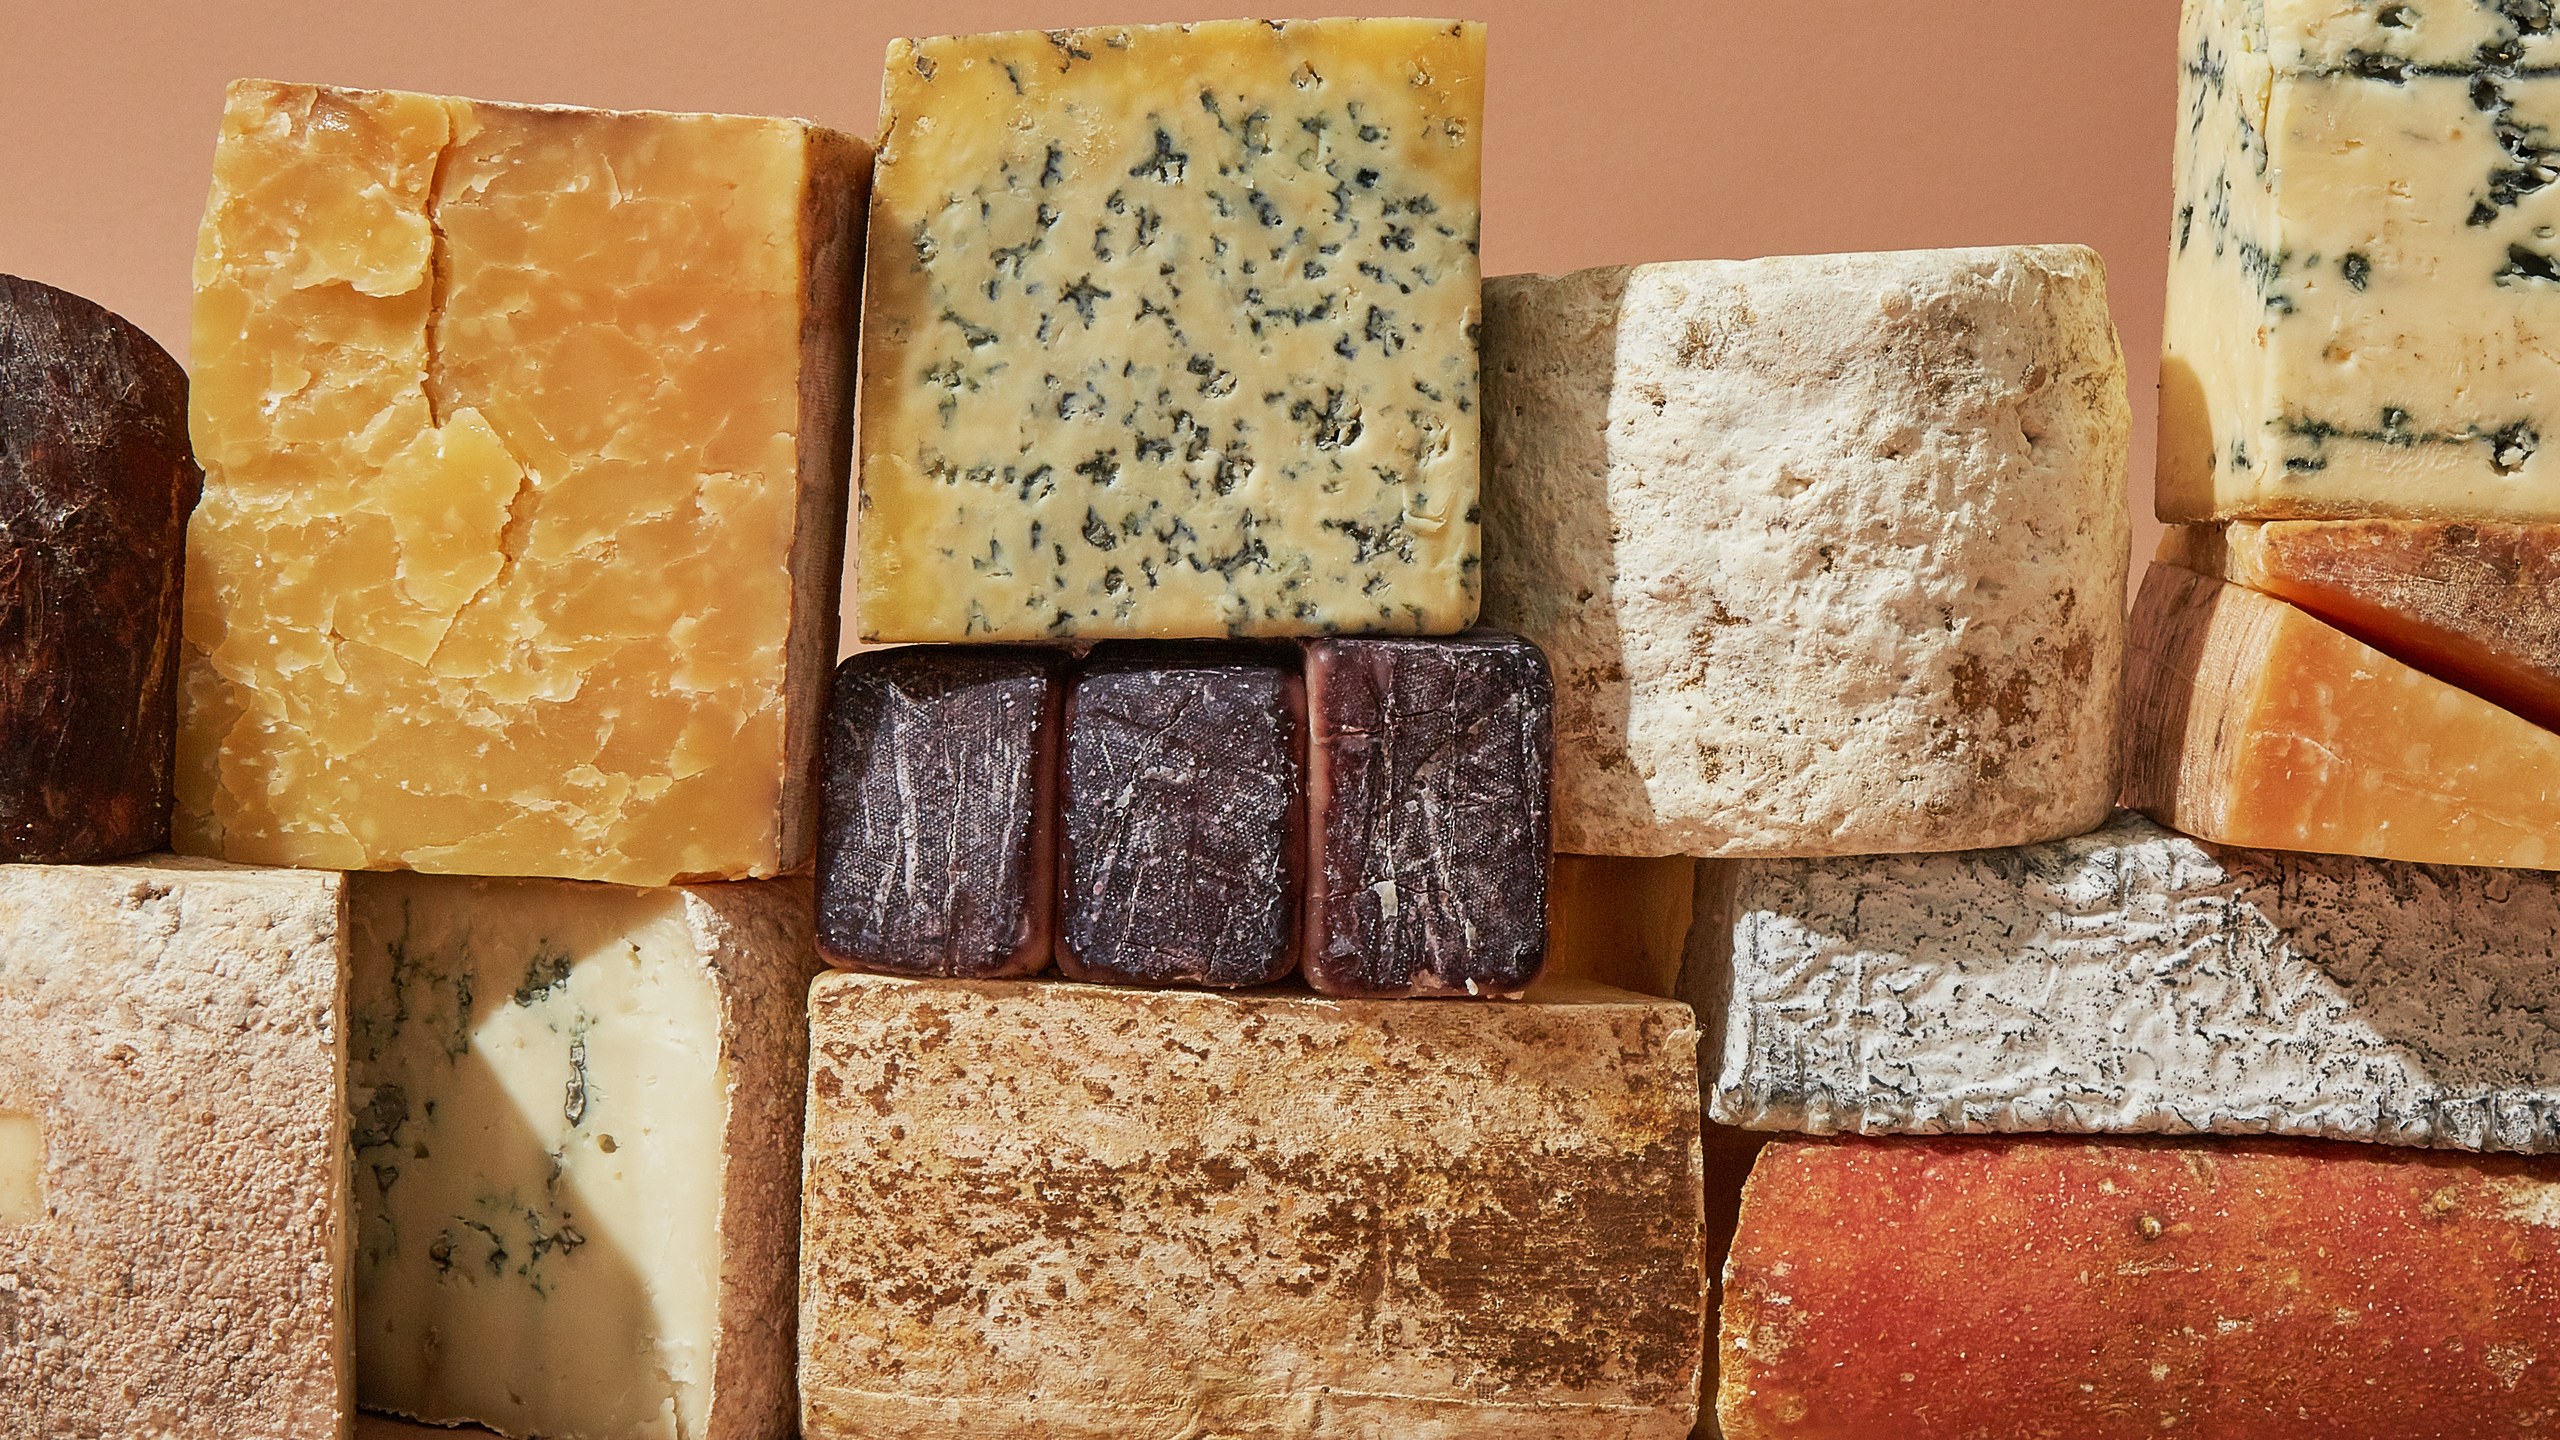 America’s Love for Cheese: Which Types Made it Through the Cut?